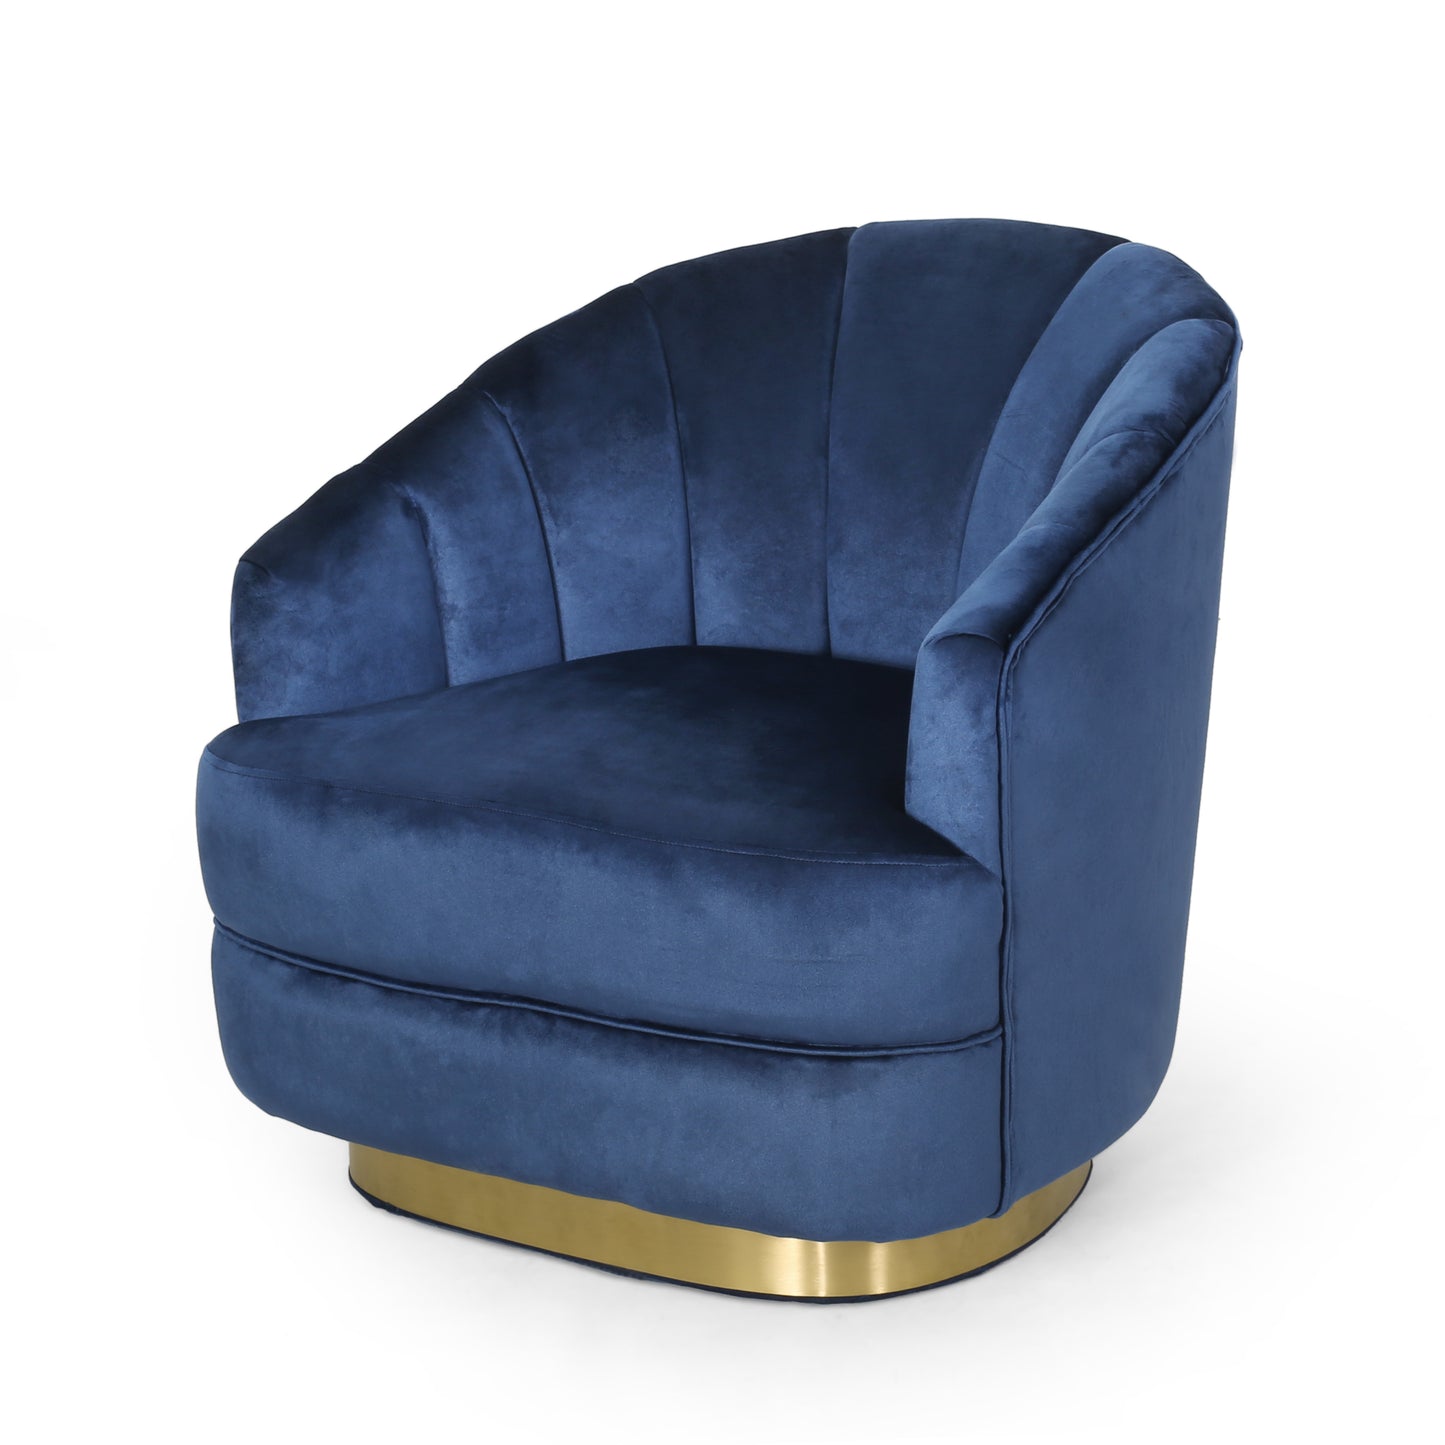 Caily Modern Glam Channel Stitch Velvet Club Chair